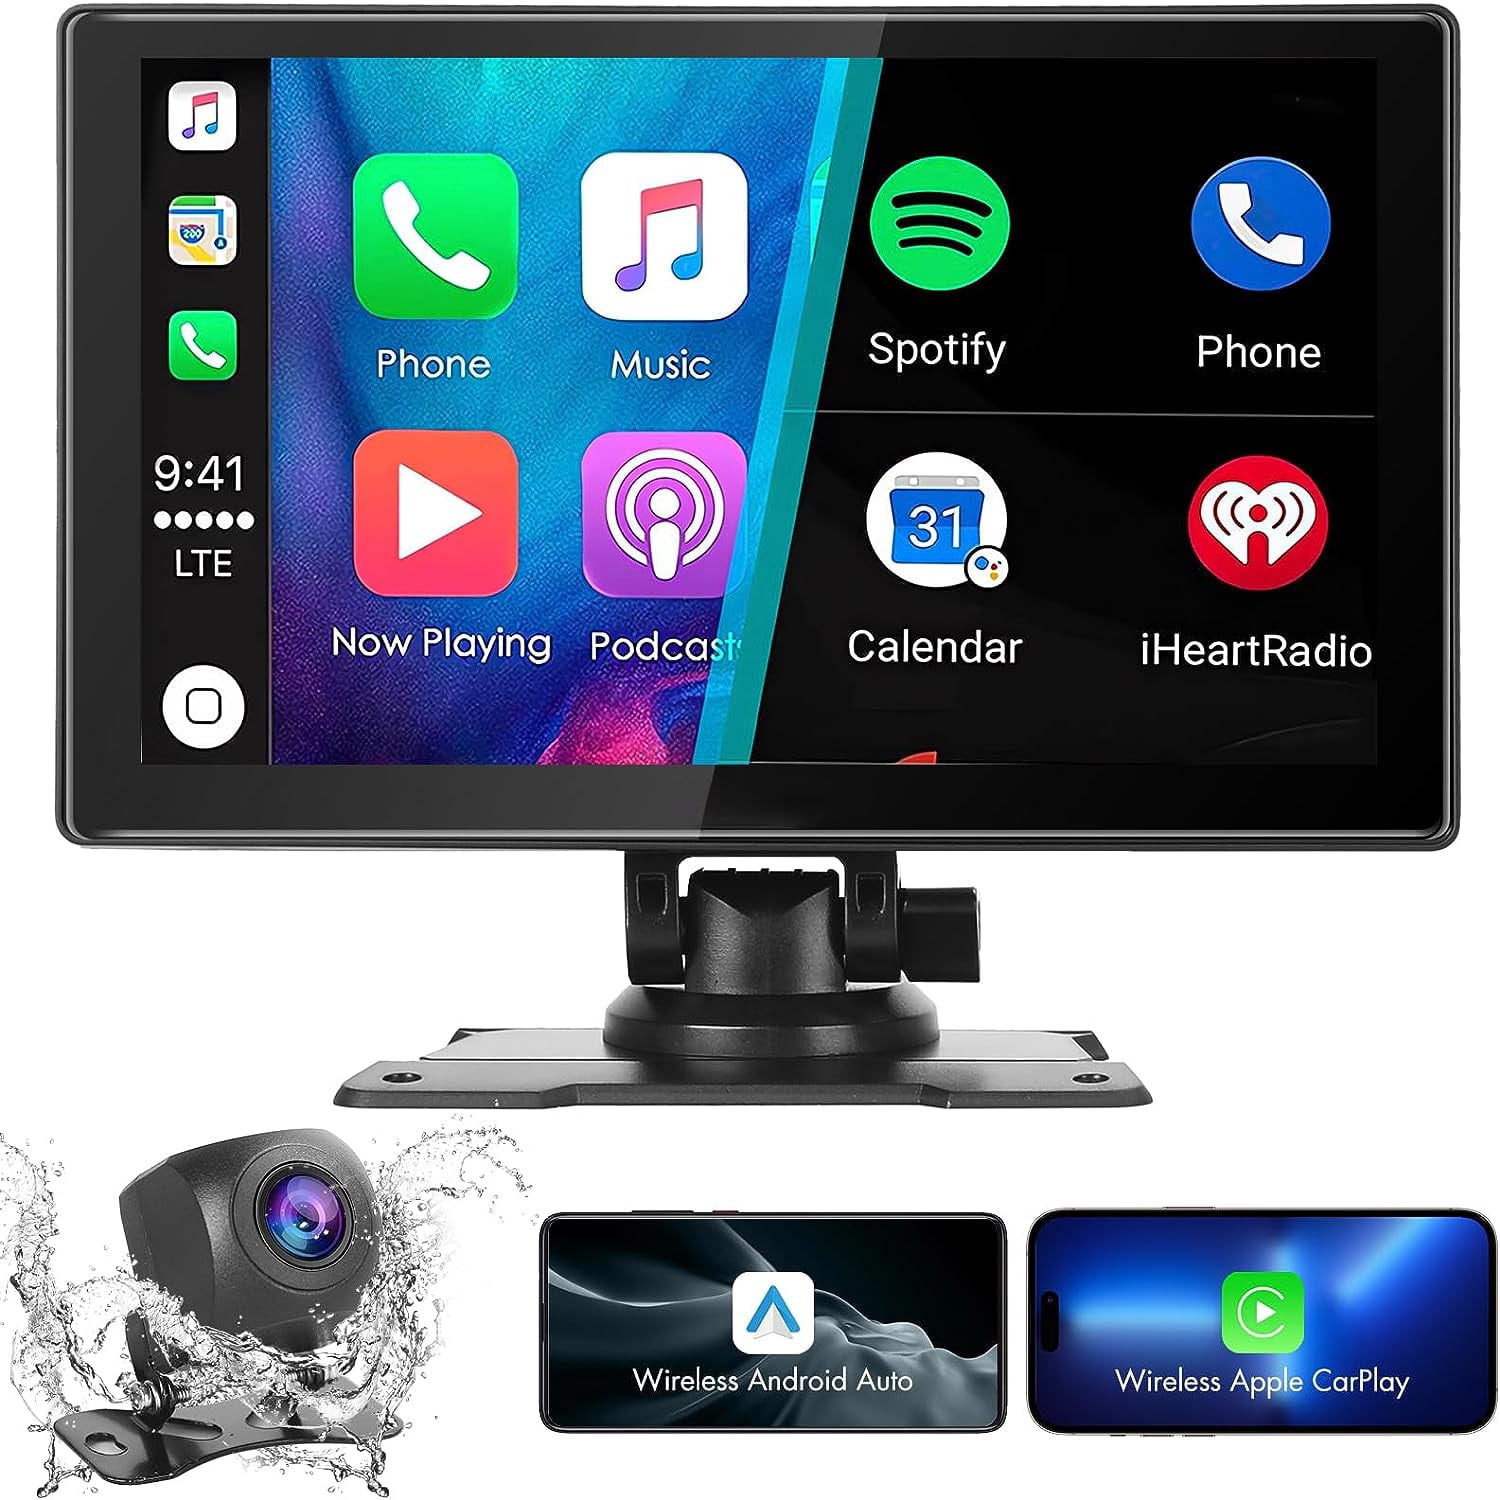 Wireless Apple CarPlay and Android Auto: Where Are They Now